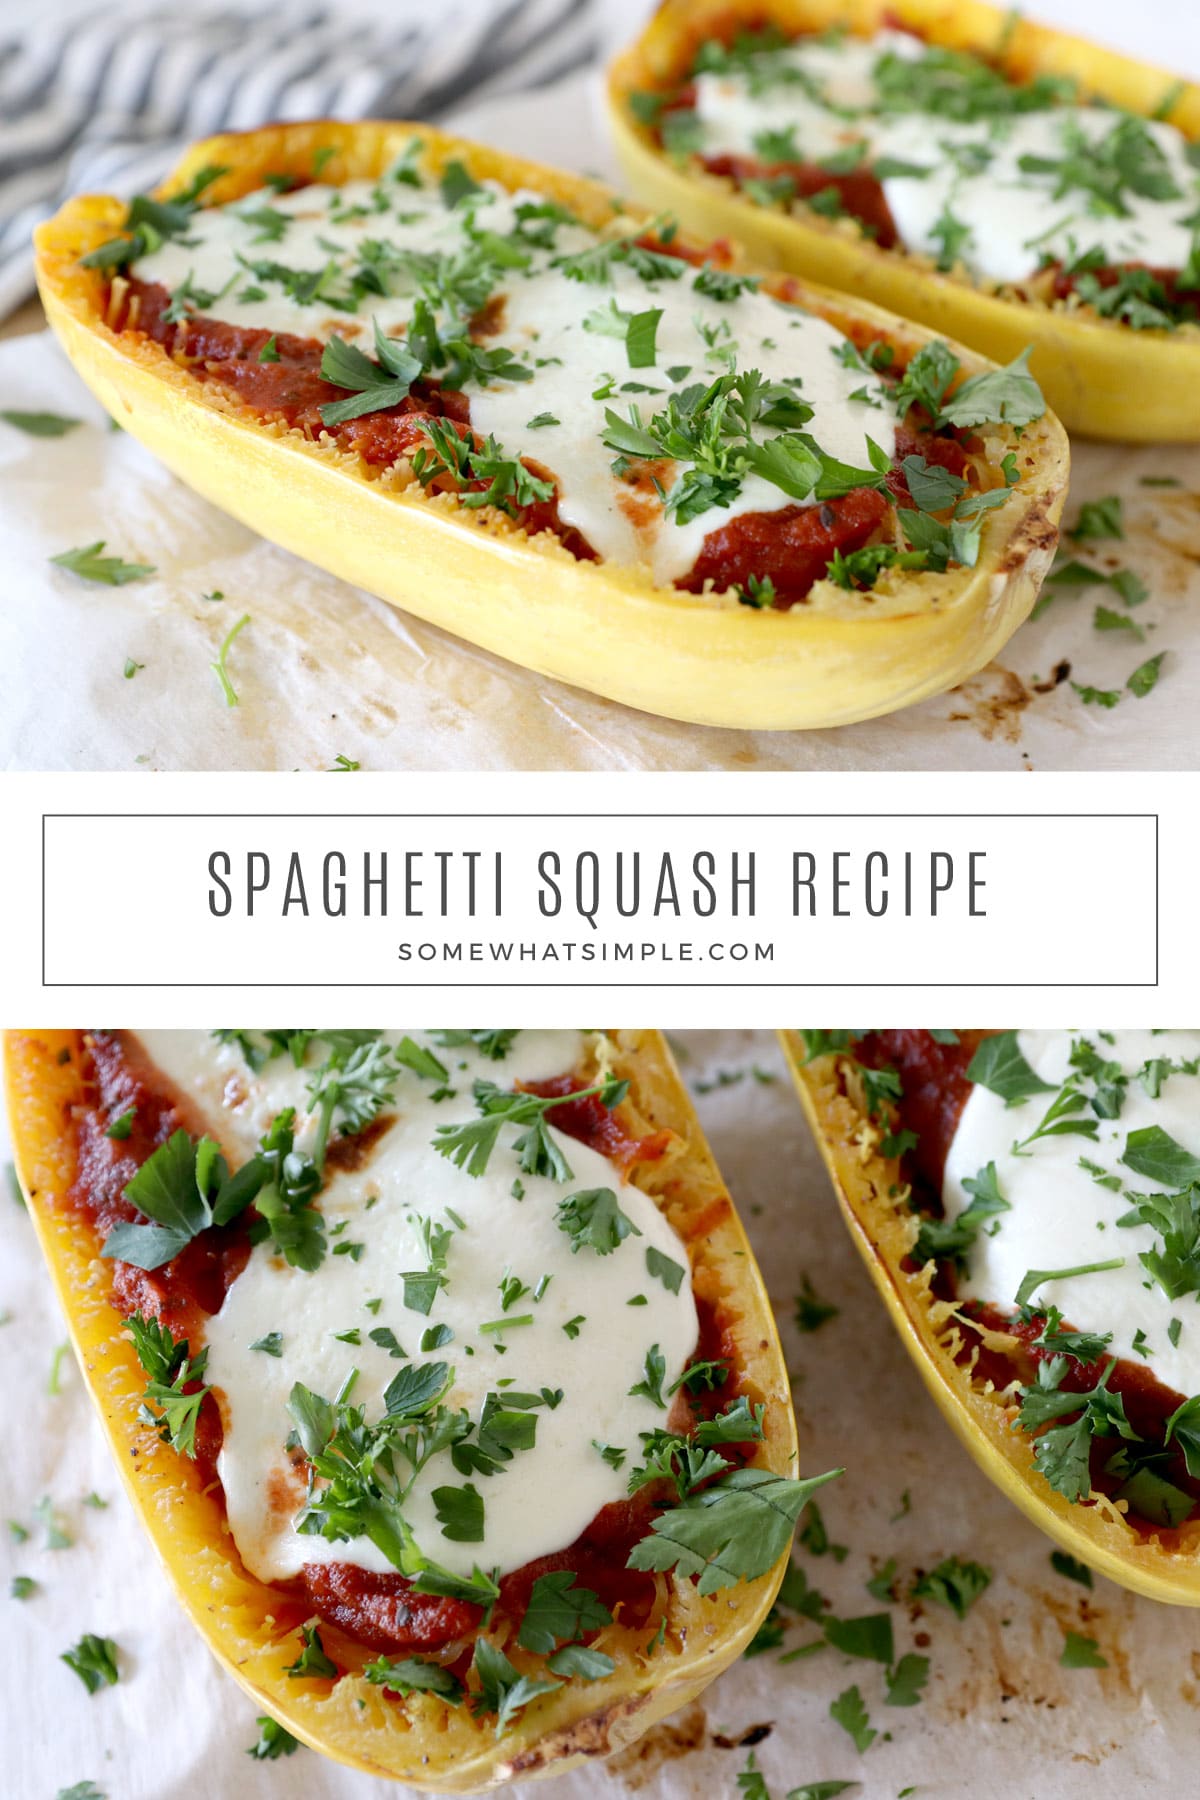 Spaghetti squash tastes like pasta, but it can be prepared differently than actual spaghetti. Here's how to cook spaghetti squash from the comfort of your own home! via @somewhatsimple